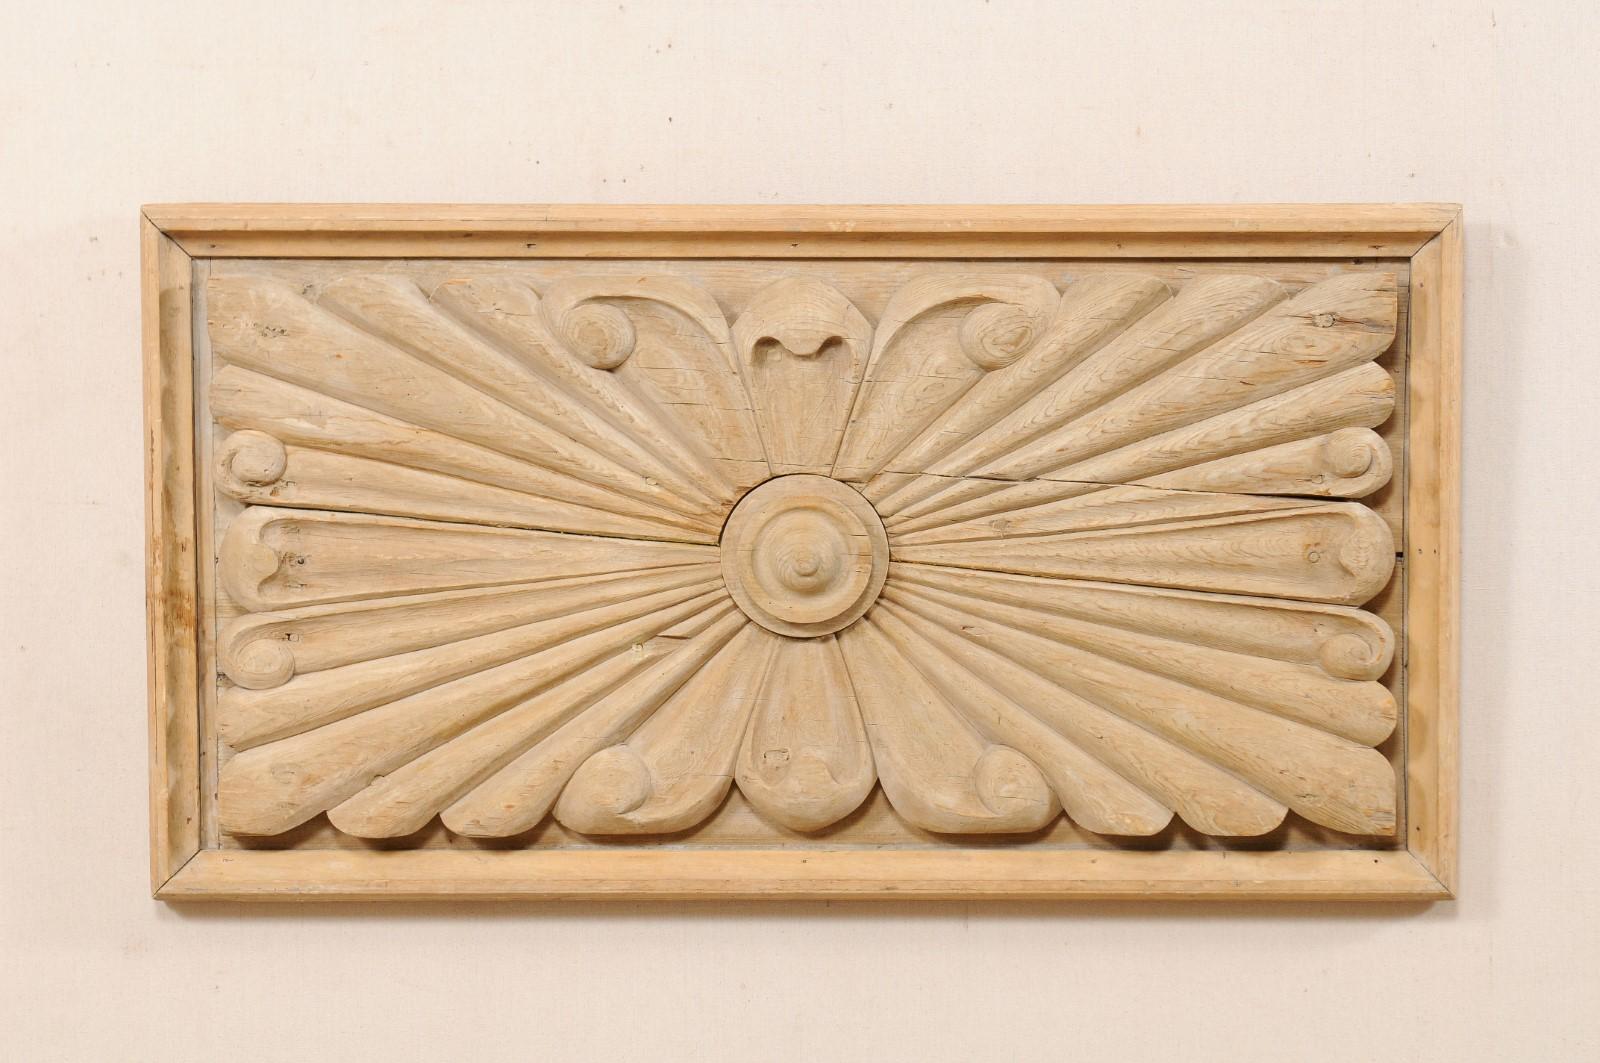 A Spanish carved wood plaque from the early 20th century. This antique natural wood wall plaque from Spain has a rectangular-shape, and features a carved stacked circle at centre, with rays extending in outward fashion, curling at their tips, all